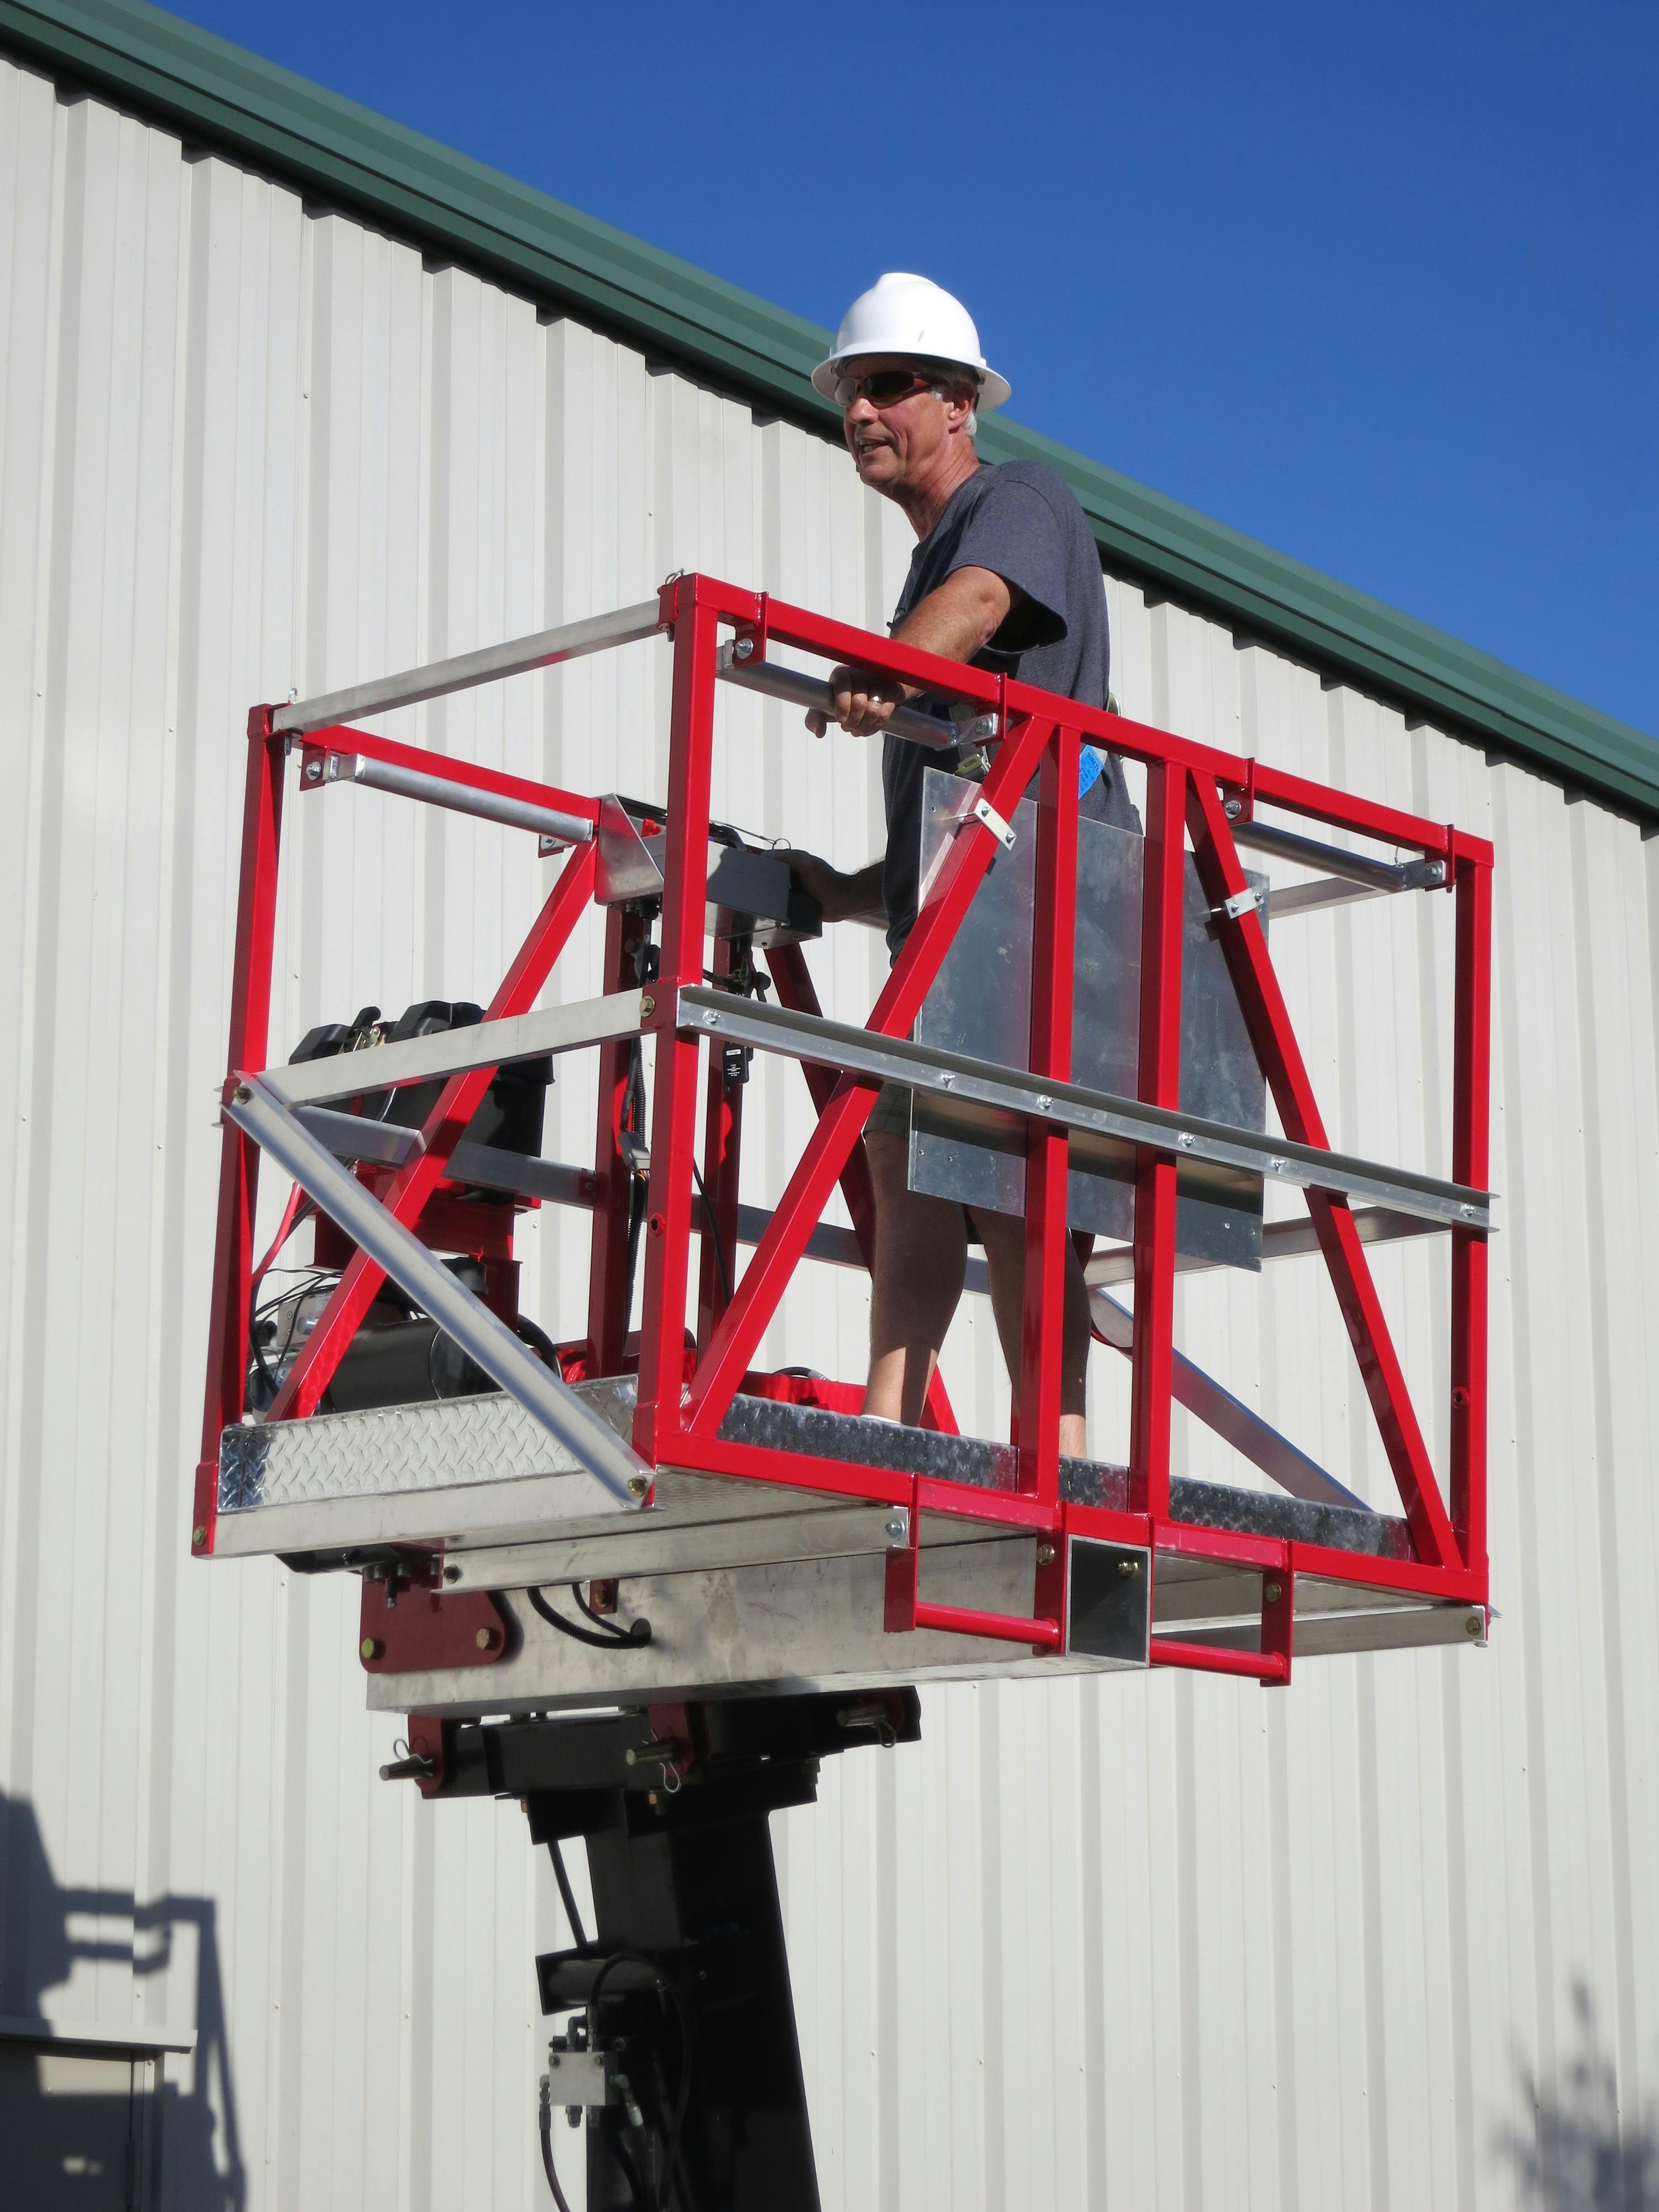 Reach-All Introduces New Aerial Platform for Work Cranes and Boom Trucks | Powered Access